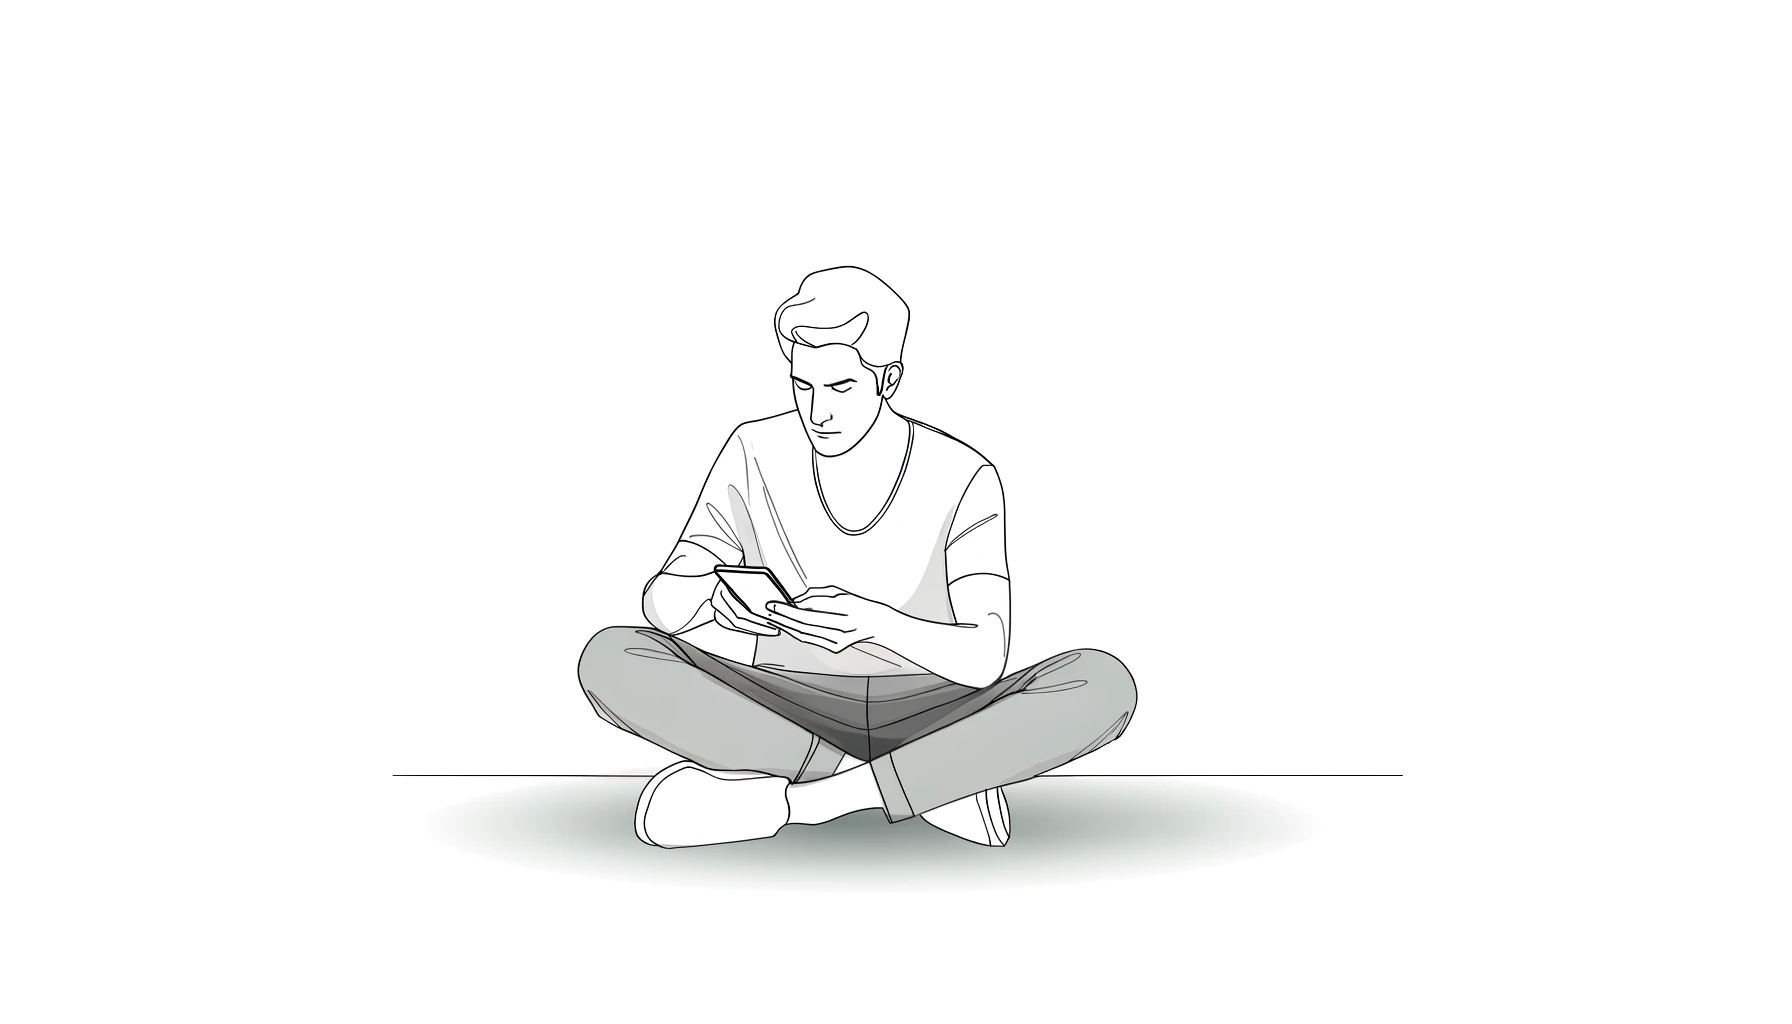 A wireframe of a man sitting crossed legged on the ground looking at Tinder and feeling the apps' effect on his self esteem